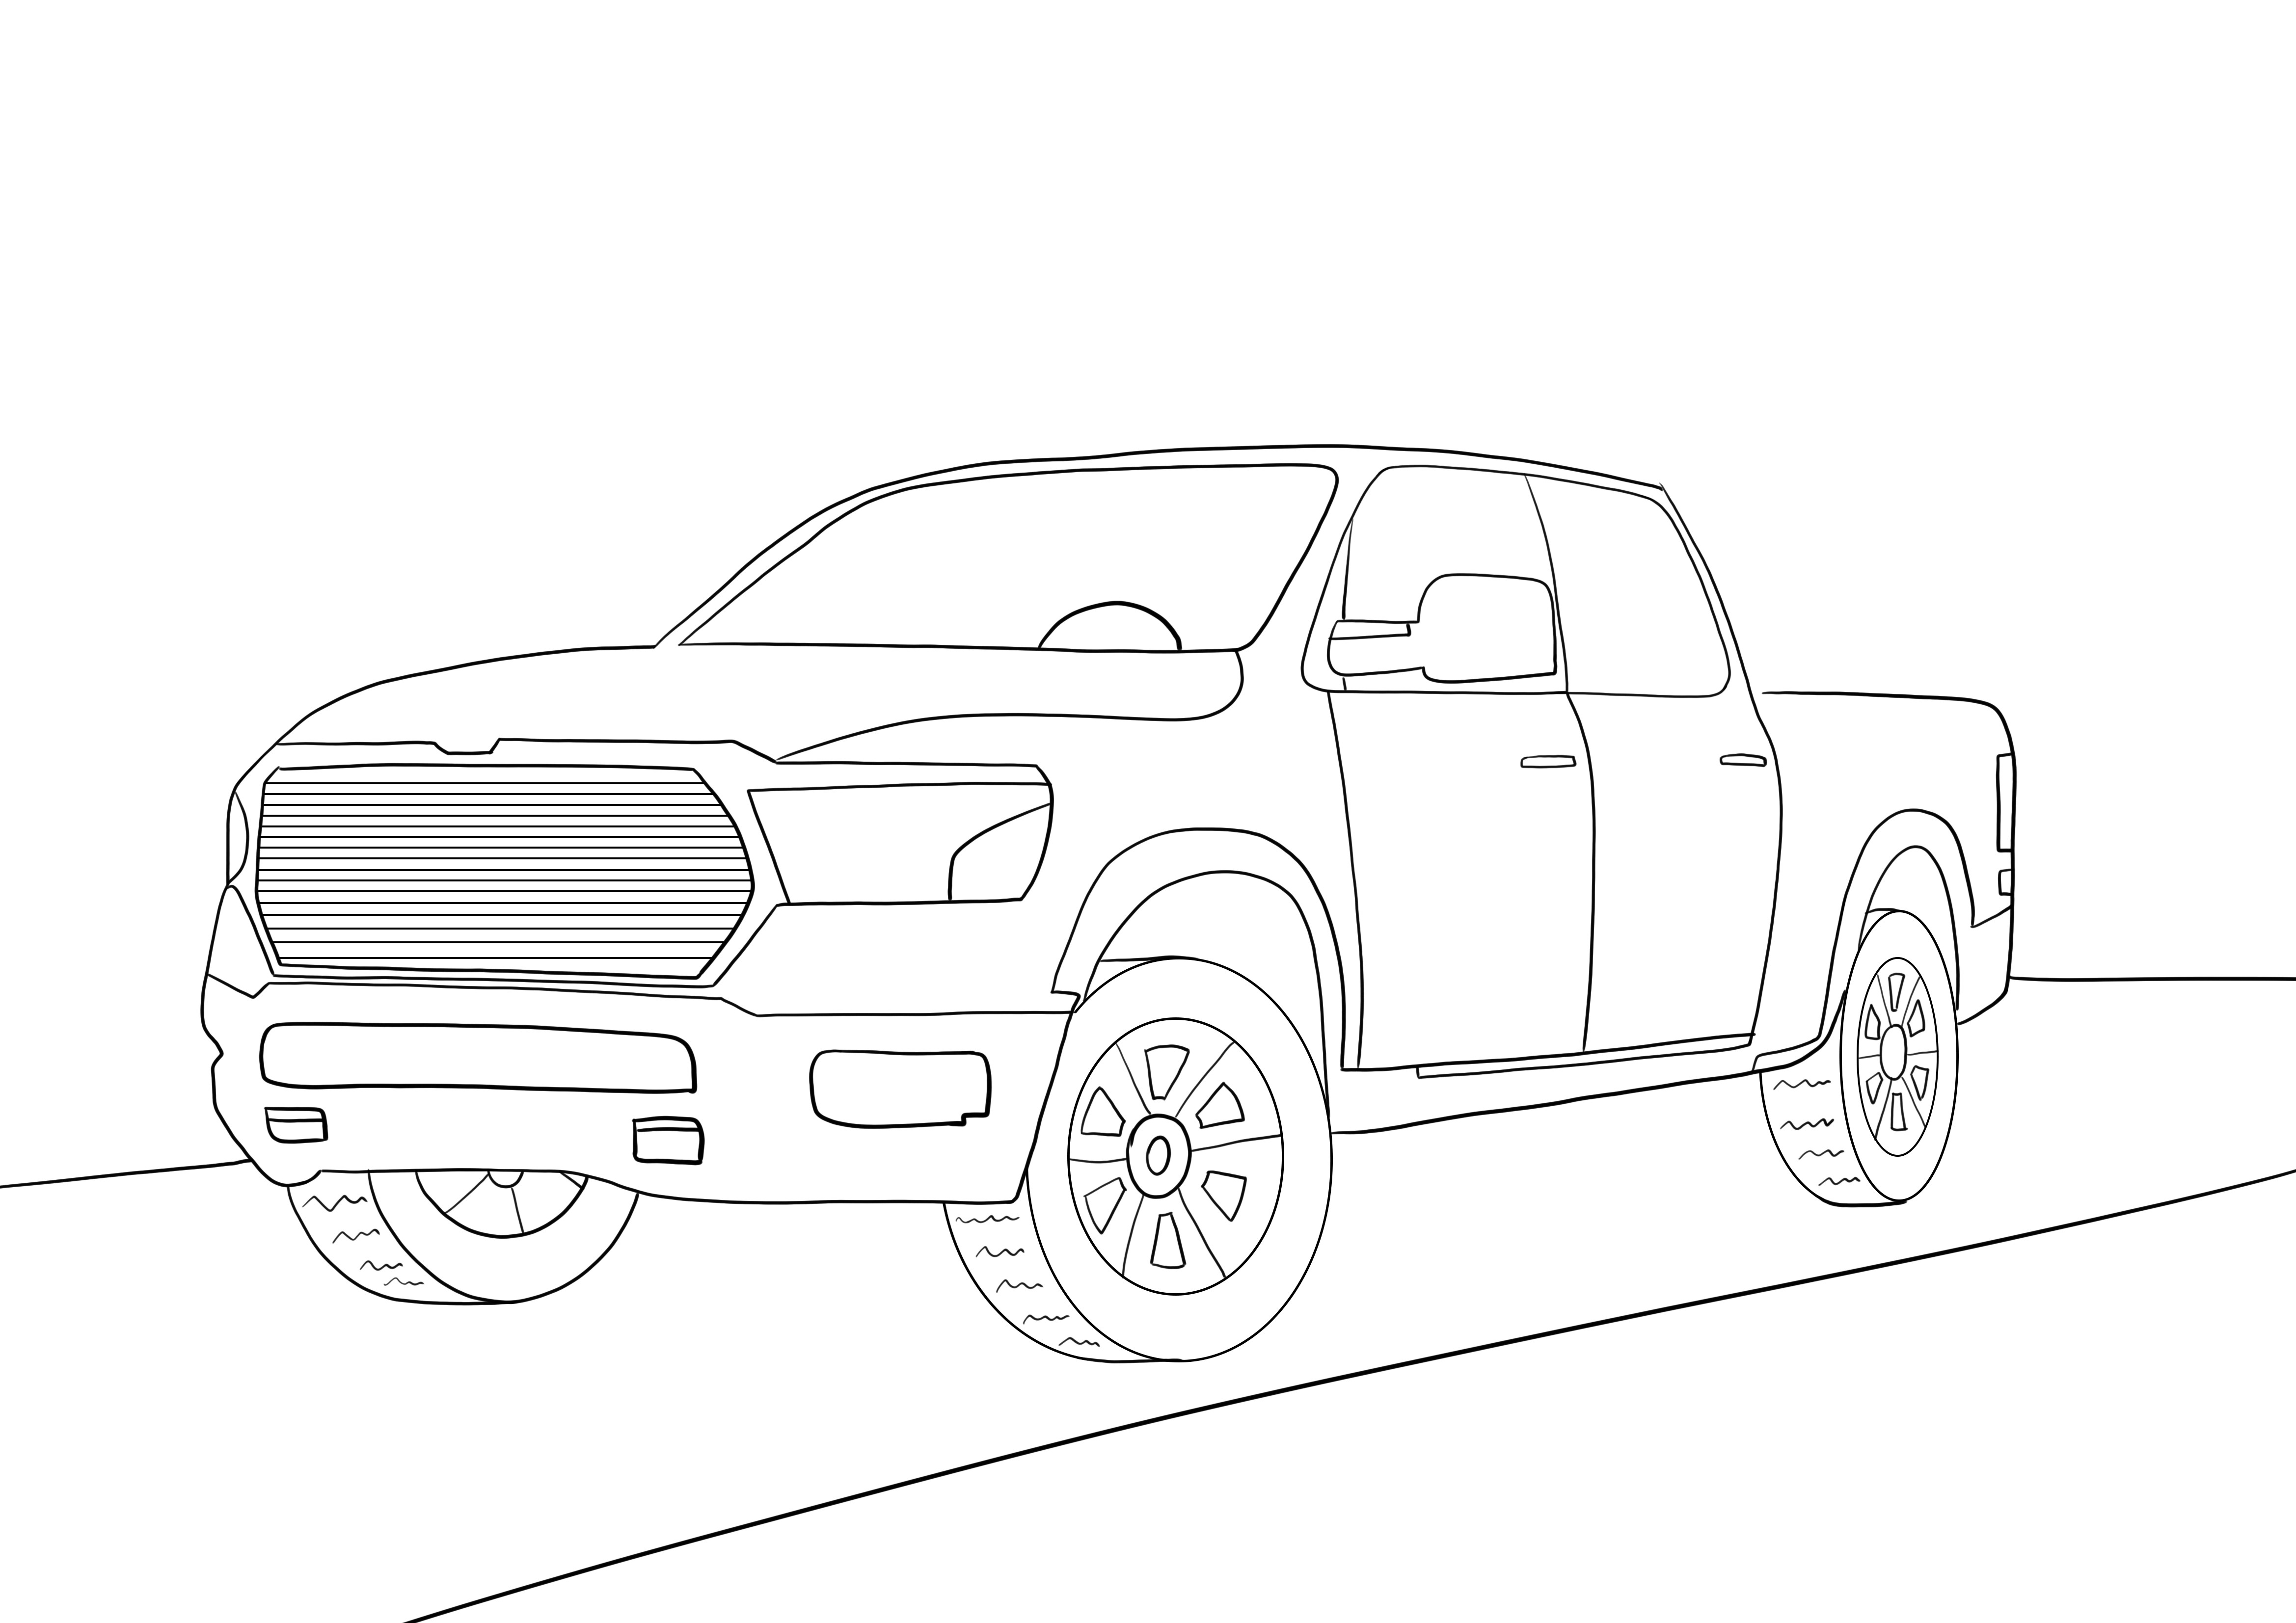 Dodge Ram car for free downloading and coloring image